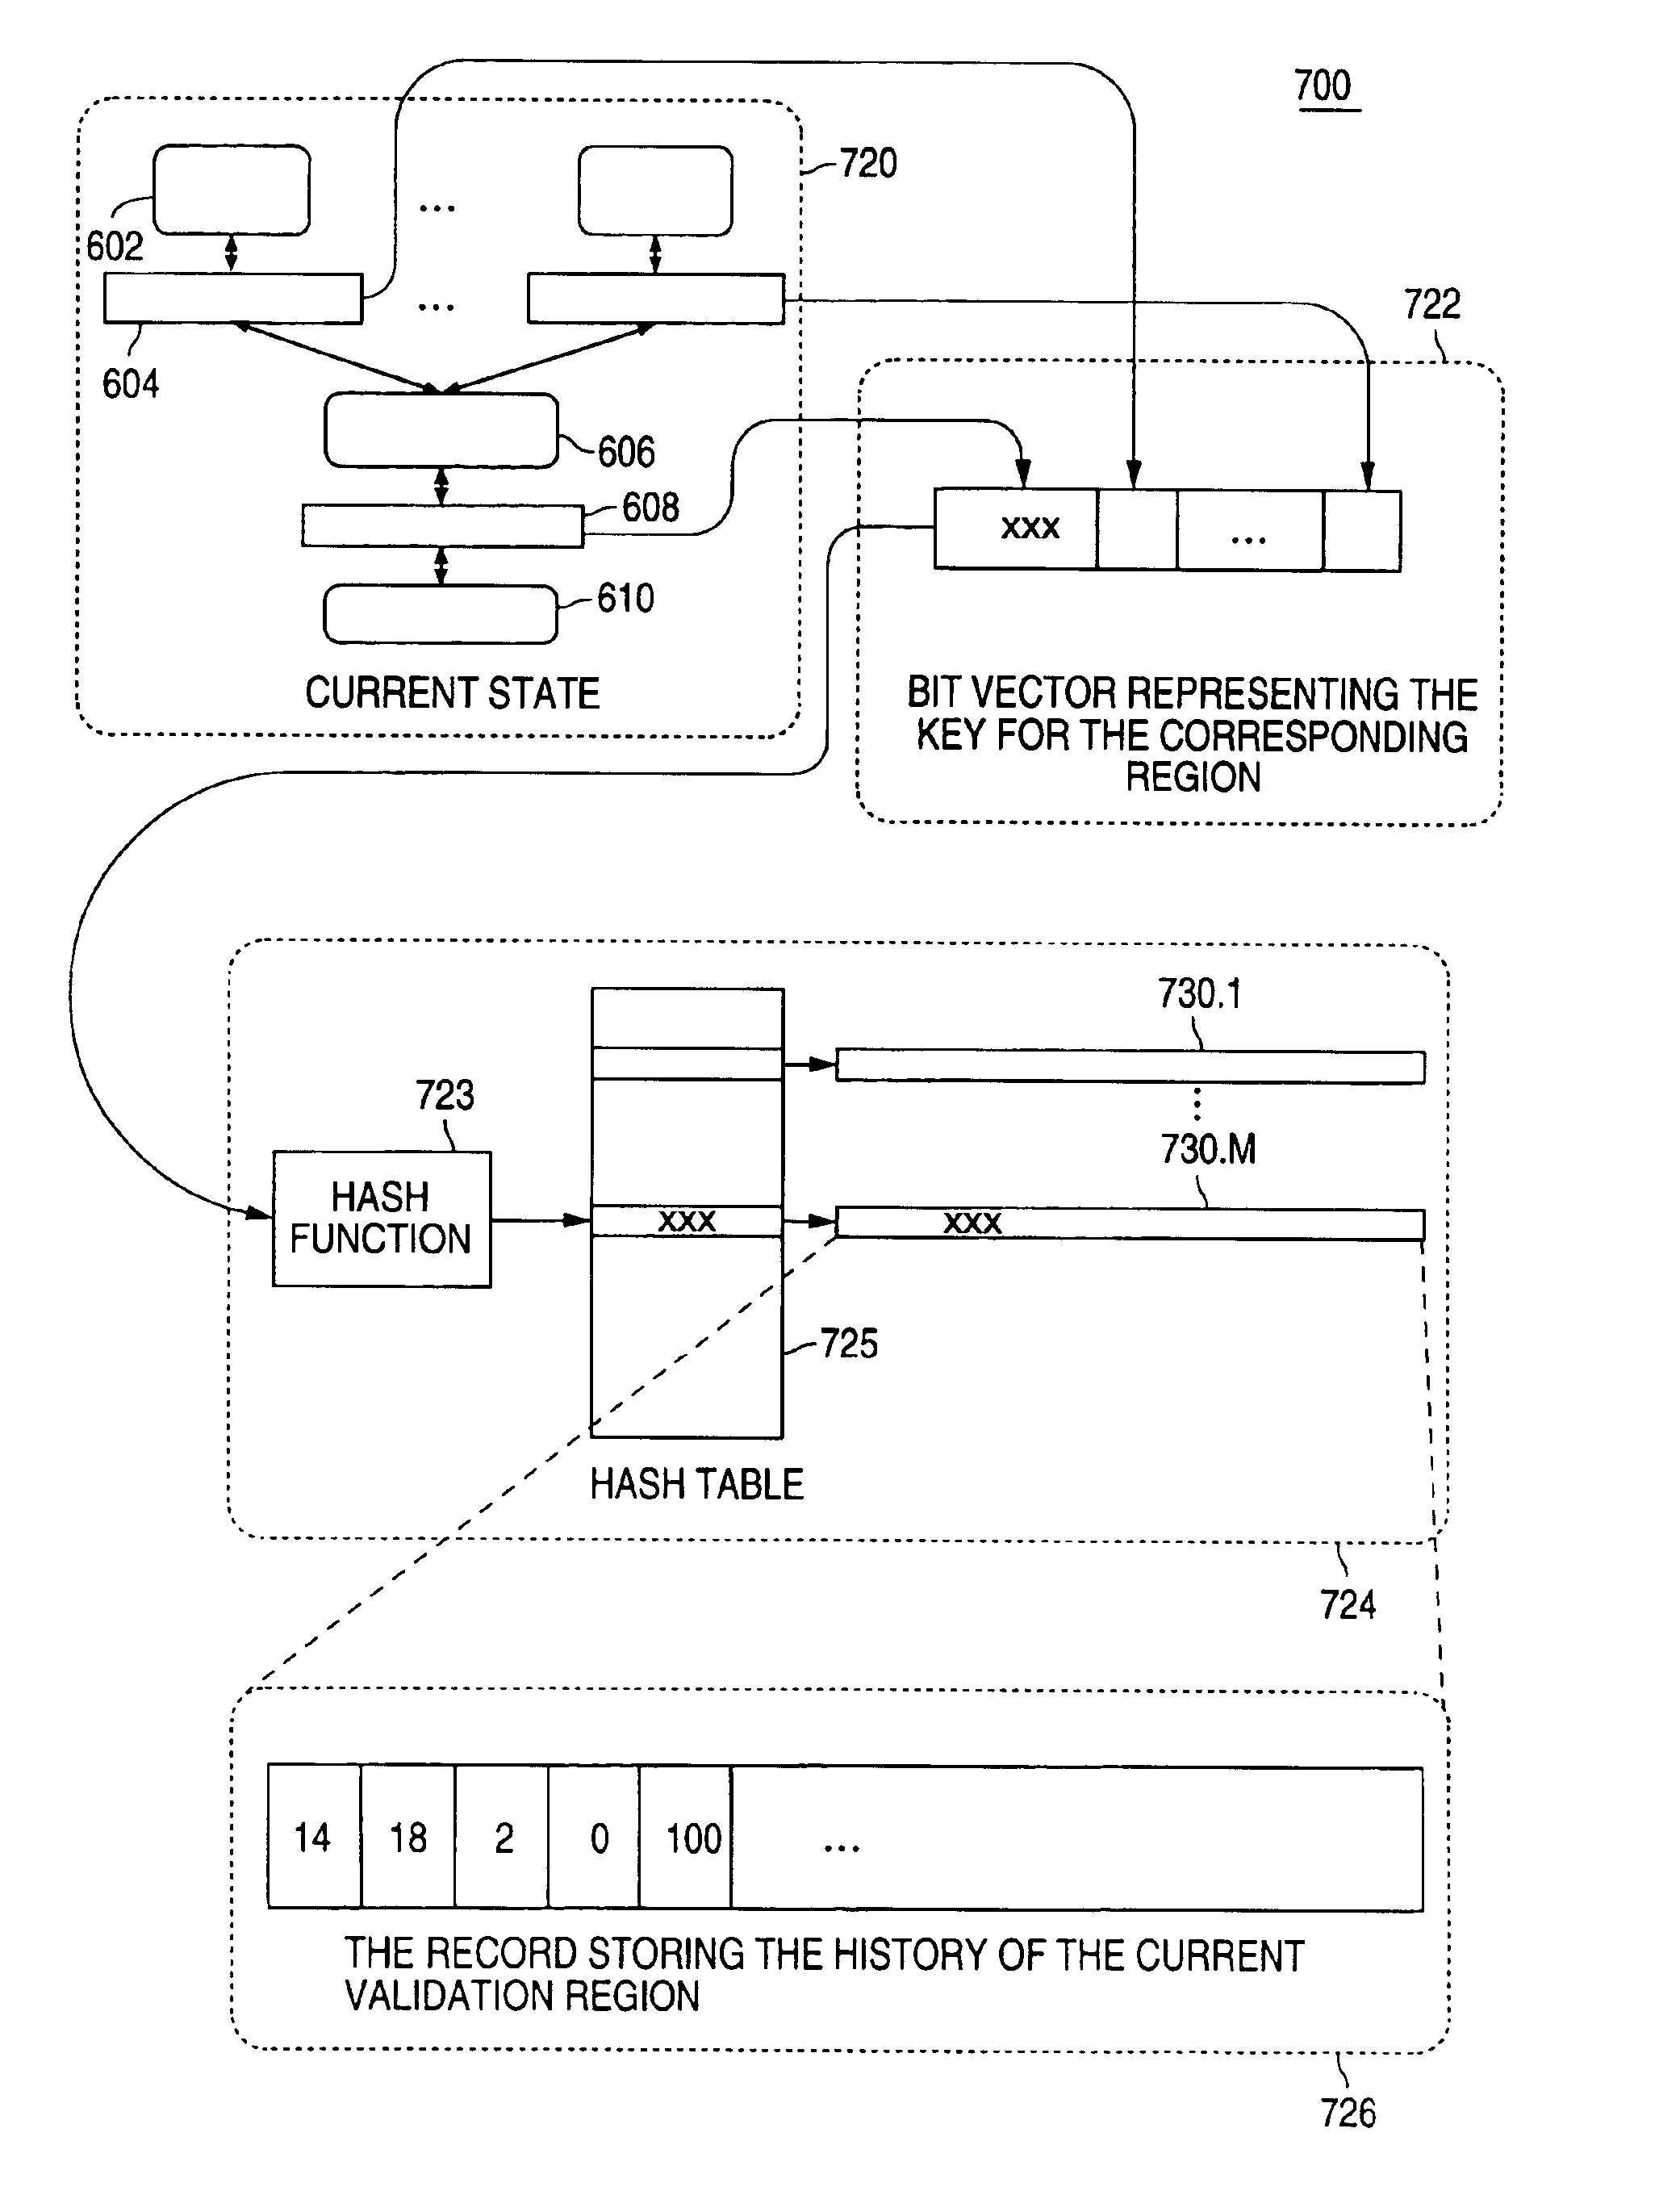 Method and apparatus for transforming test stimulus